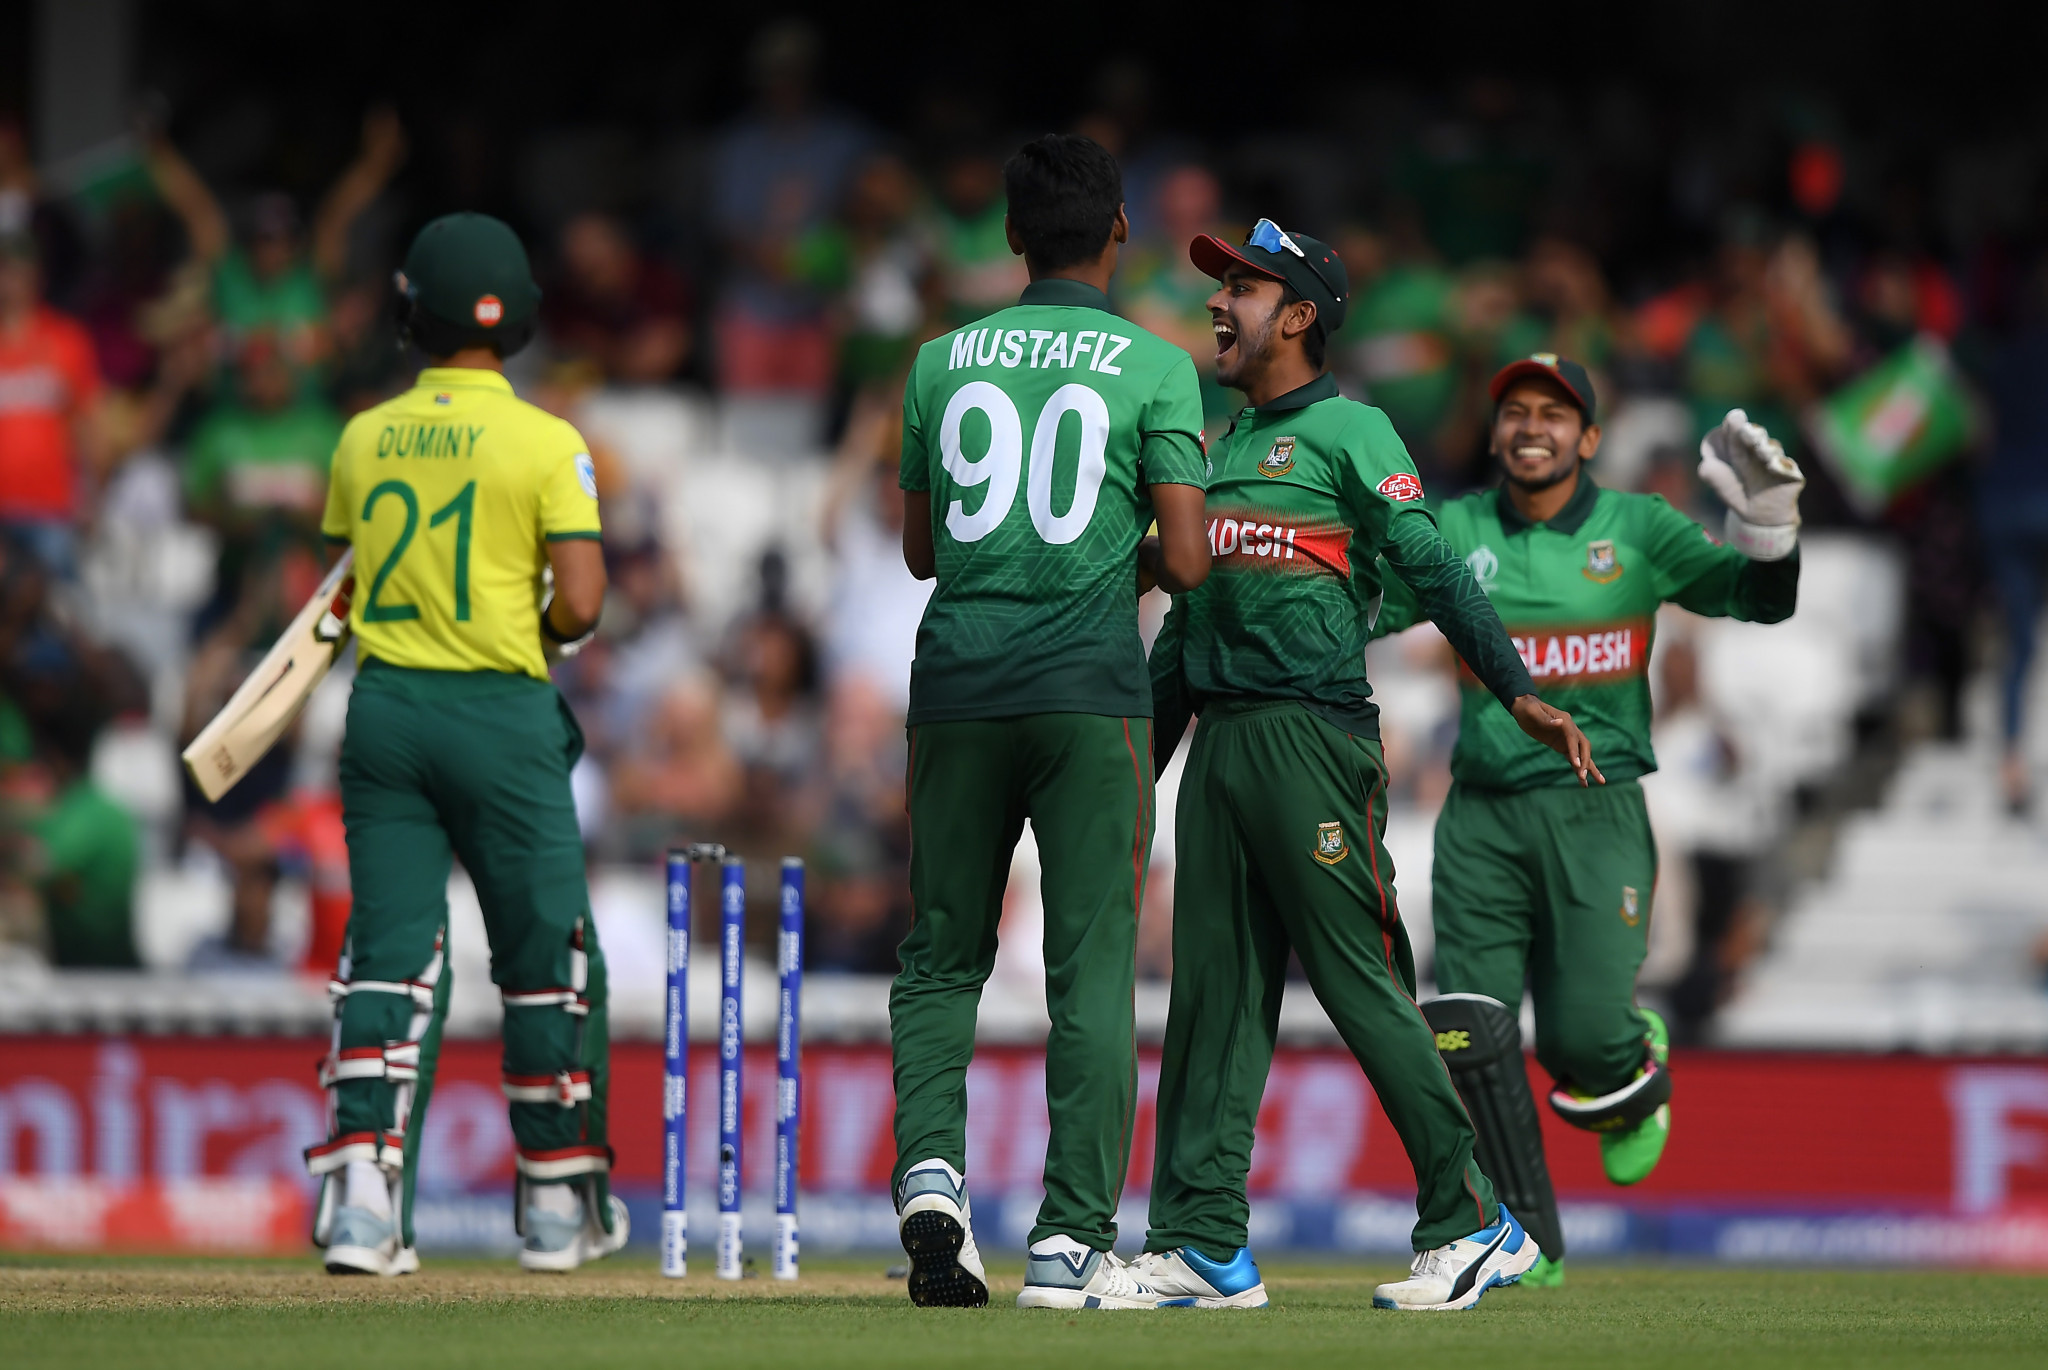 Bangladesh posted their highest one-day international total as they got their Cricket World Cup off to a winning start ©Getty Images